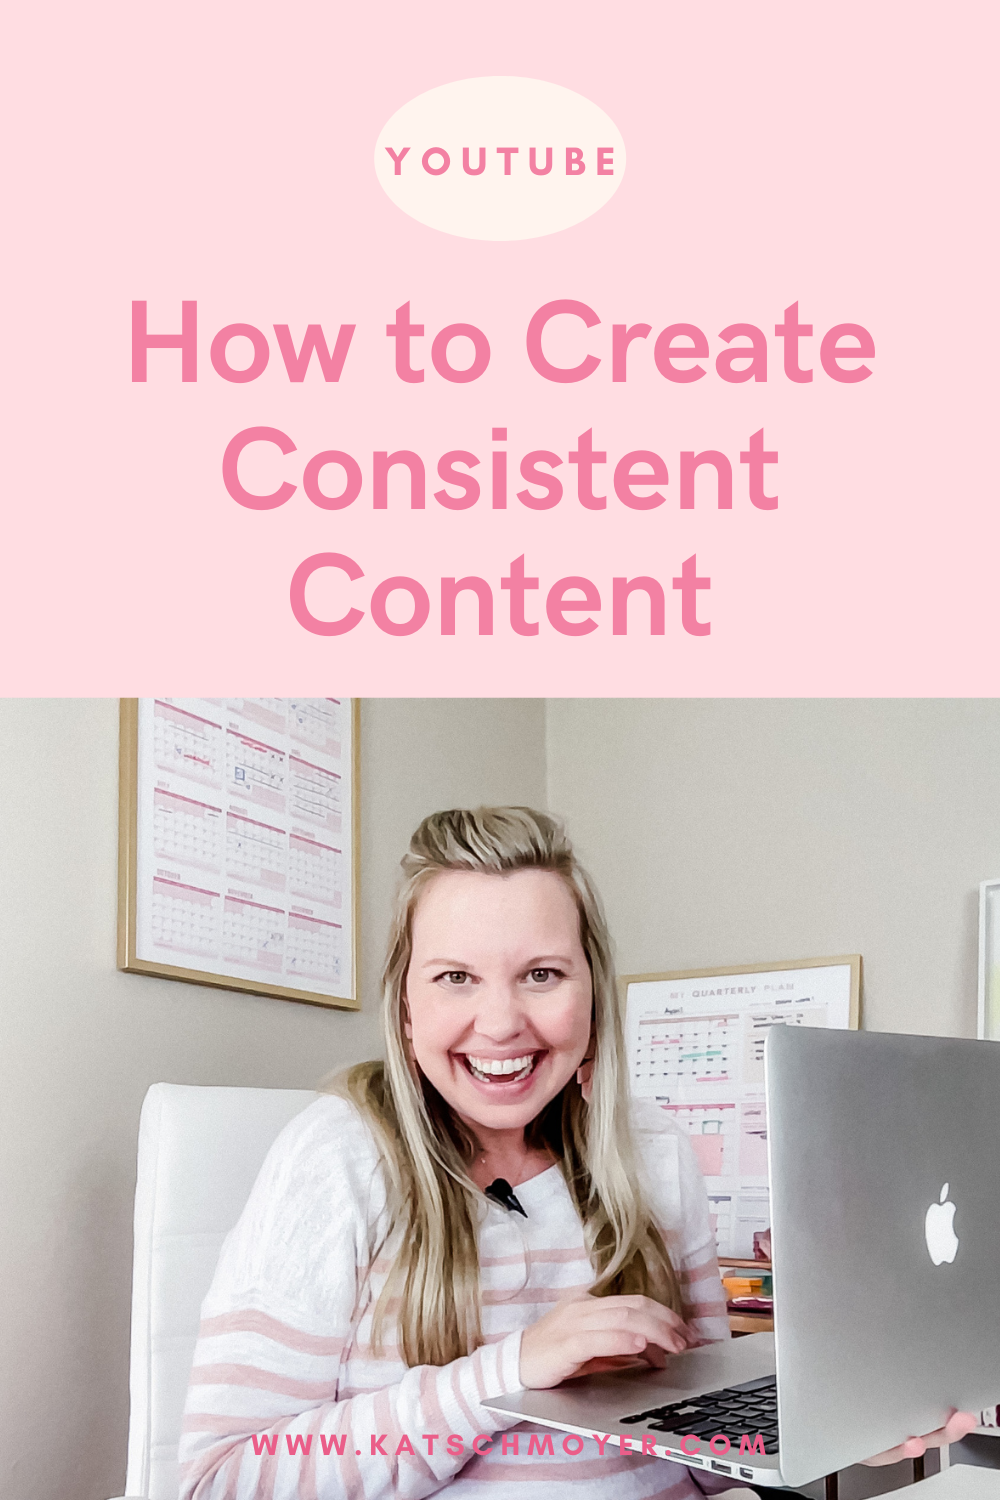 How to Create Consistent Content